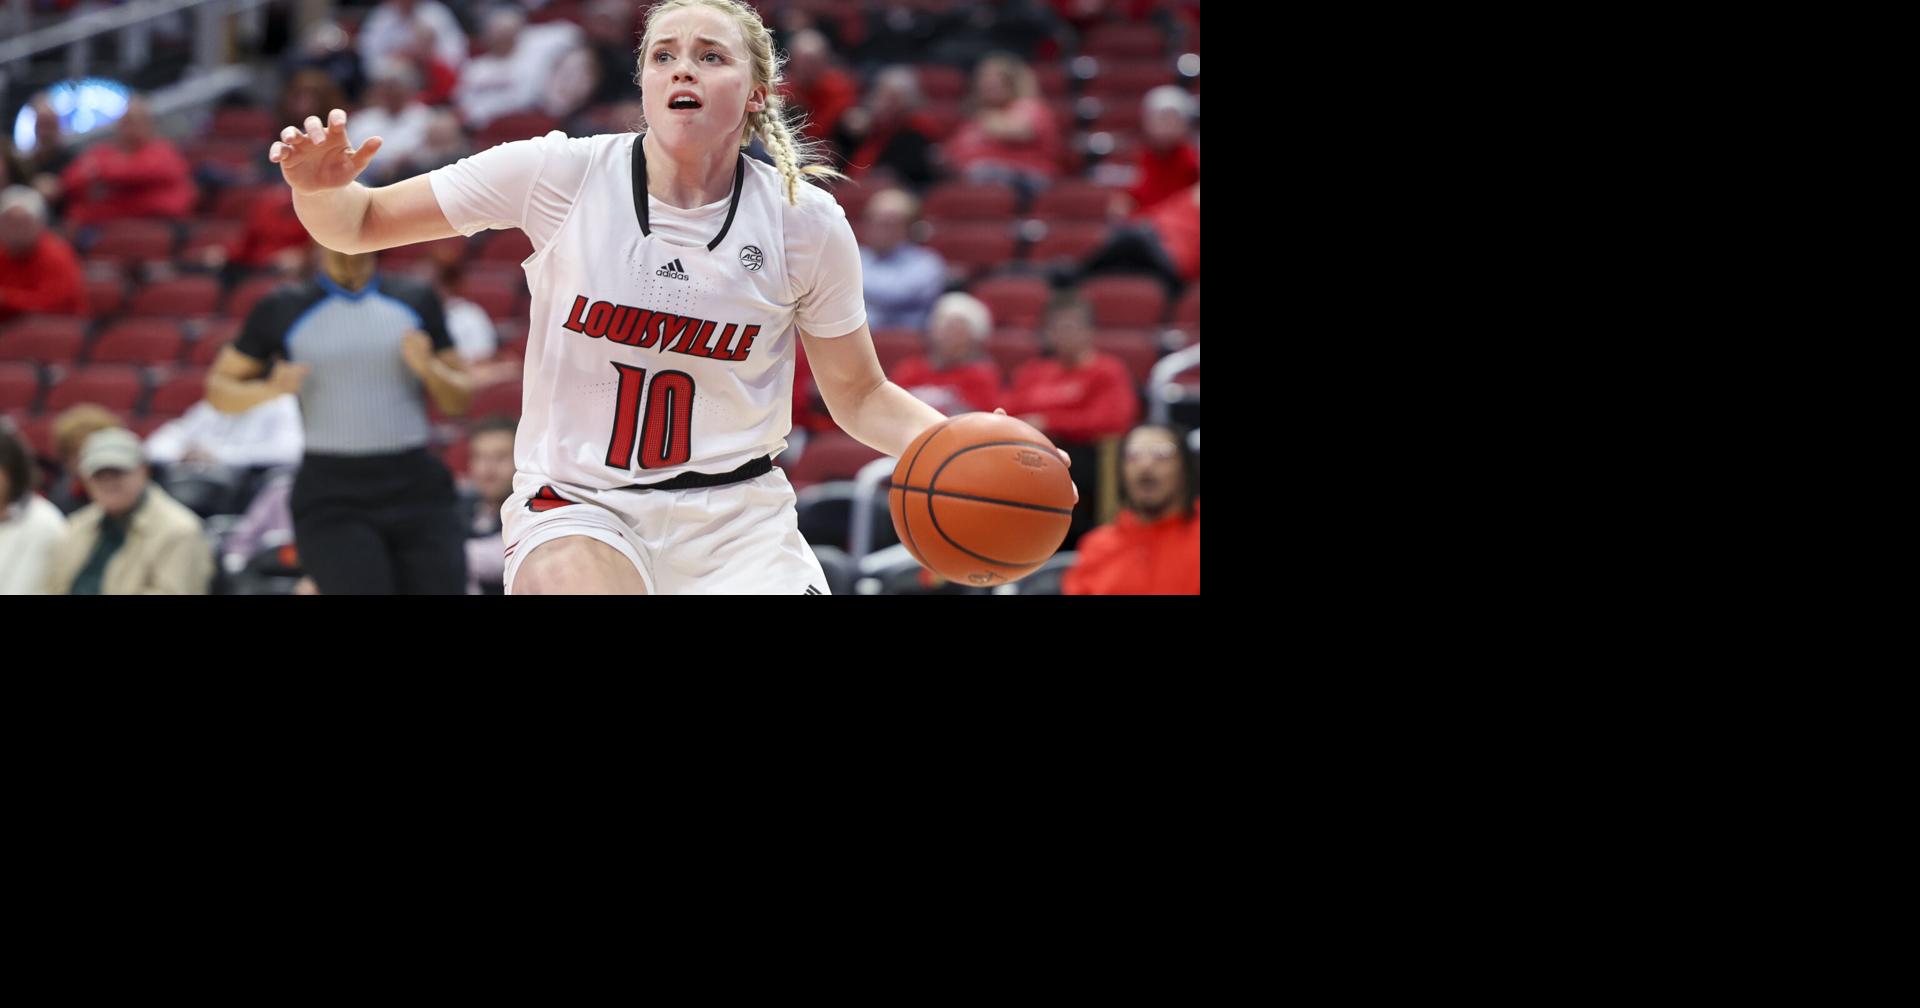 U of L women's basketball rally comes up short at Duke